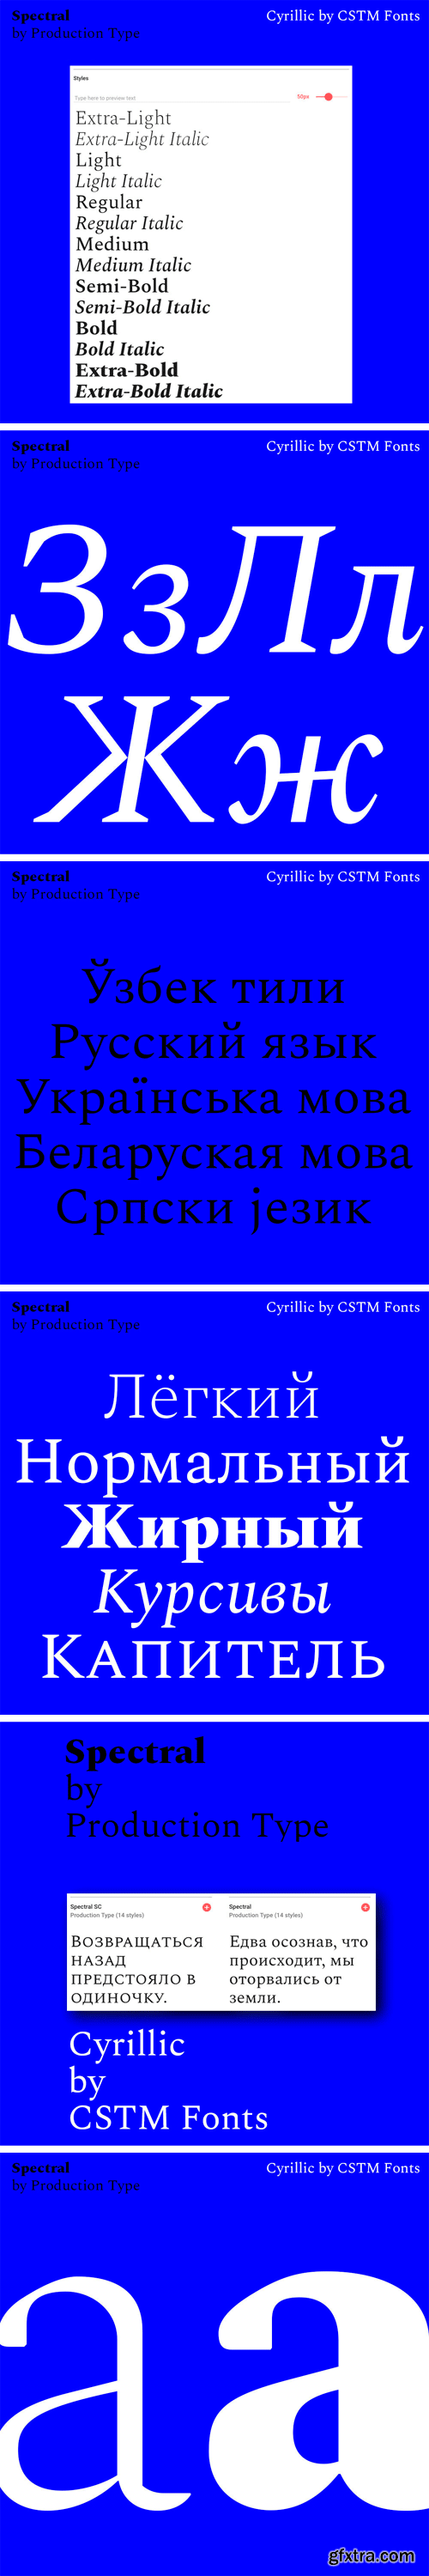 Spectral Font Family [with Cyrillic Support]